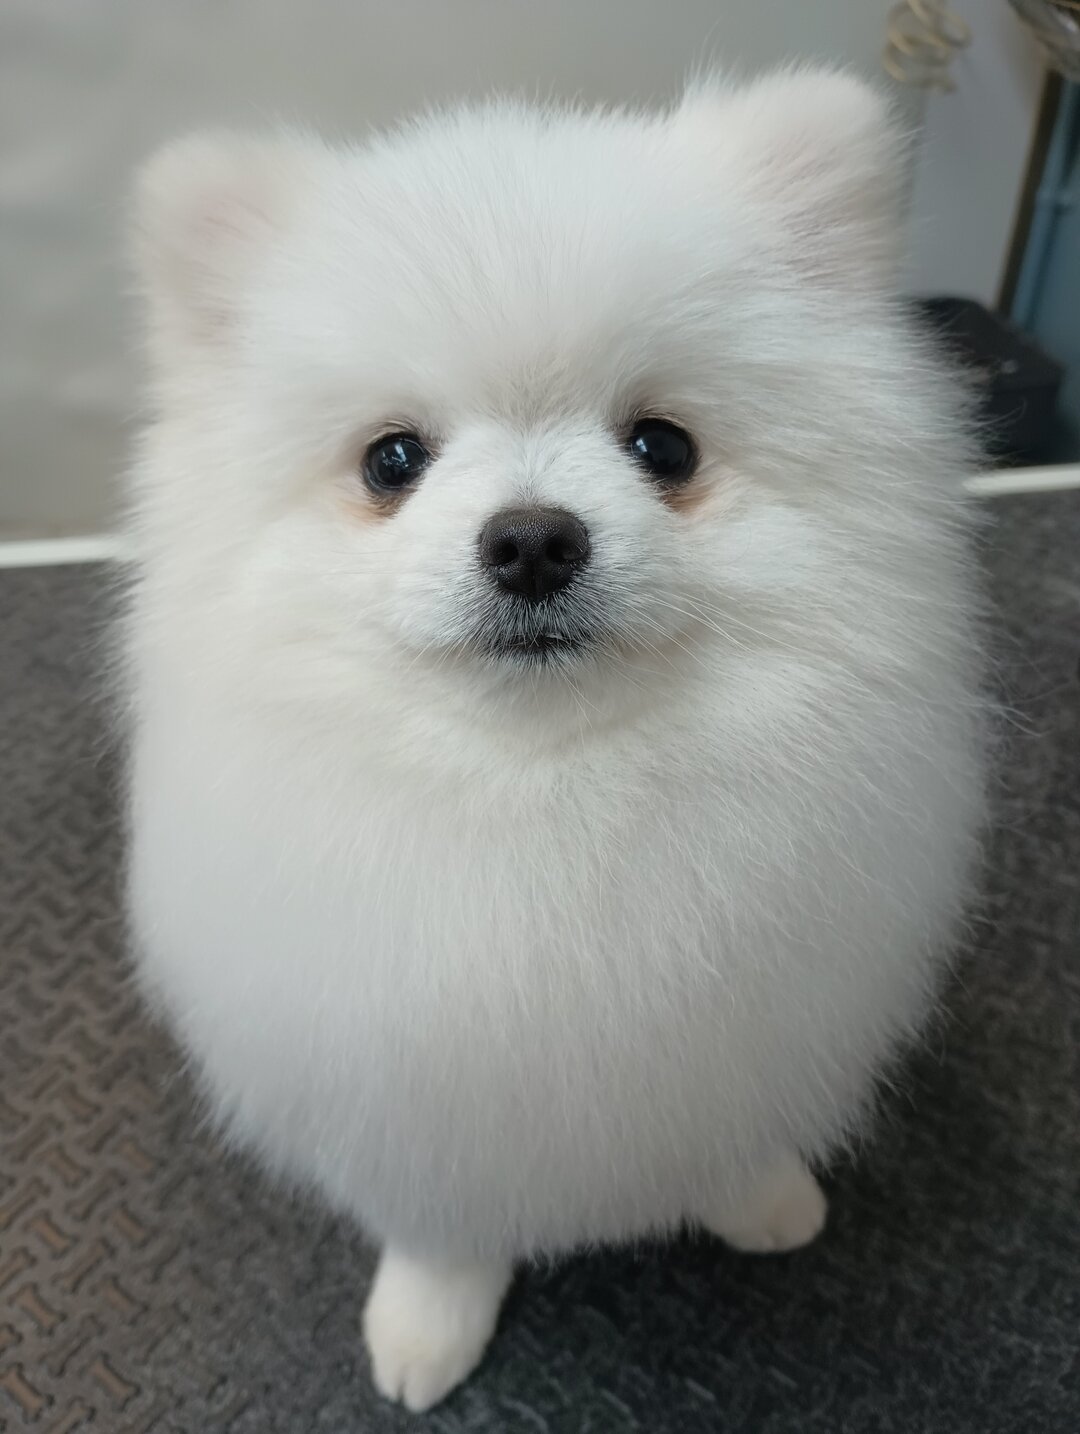 🧡 This adorable little ball of fur could not be any cuter!  Here is your cute Pup fix for the day!⁣
#cutepups #cutepupfix #bowsersbath  #bowsersbathdoggrooming #bowsersbathtigard #bowsersbathselfwash #bowsersbathdogwash #bowsersbathdogs #tigardgroom